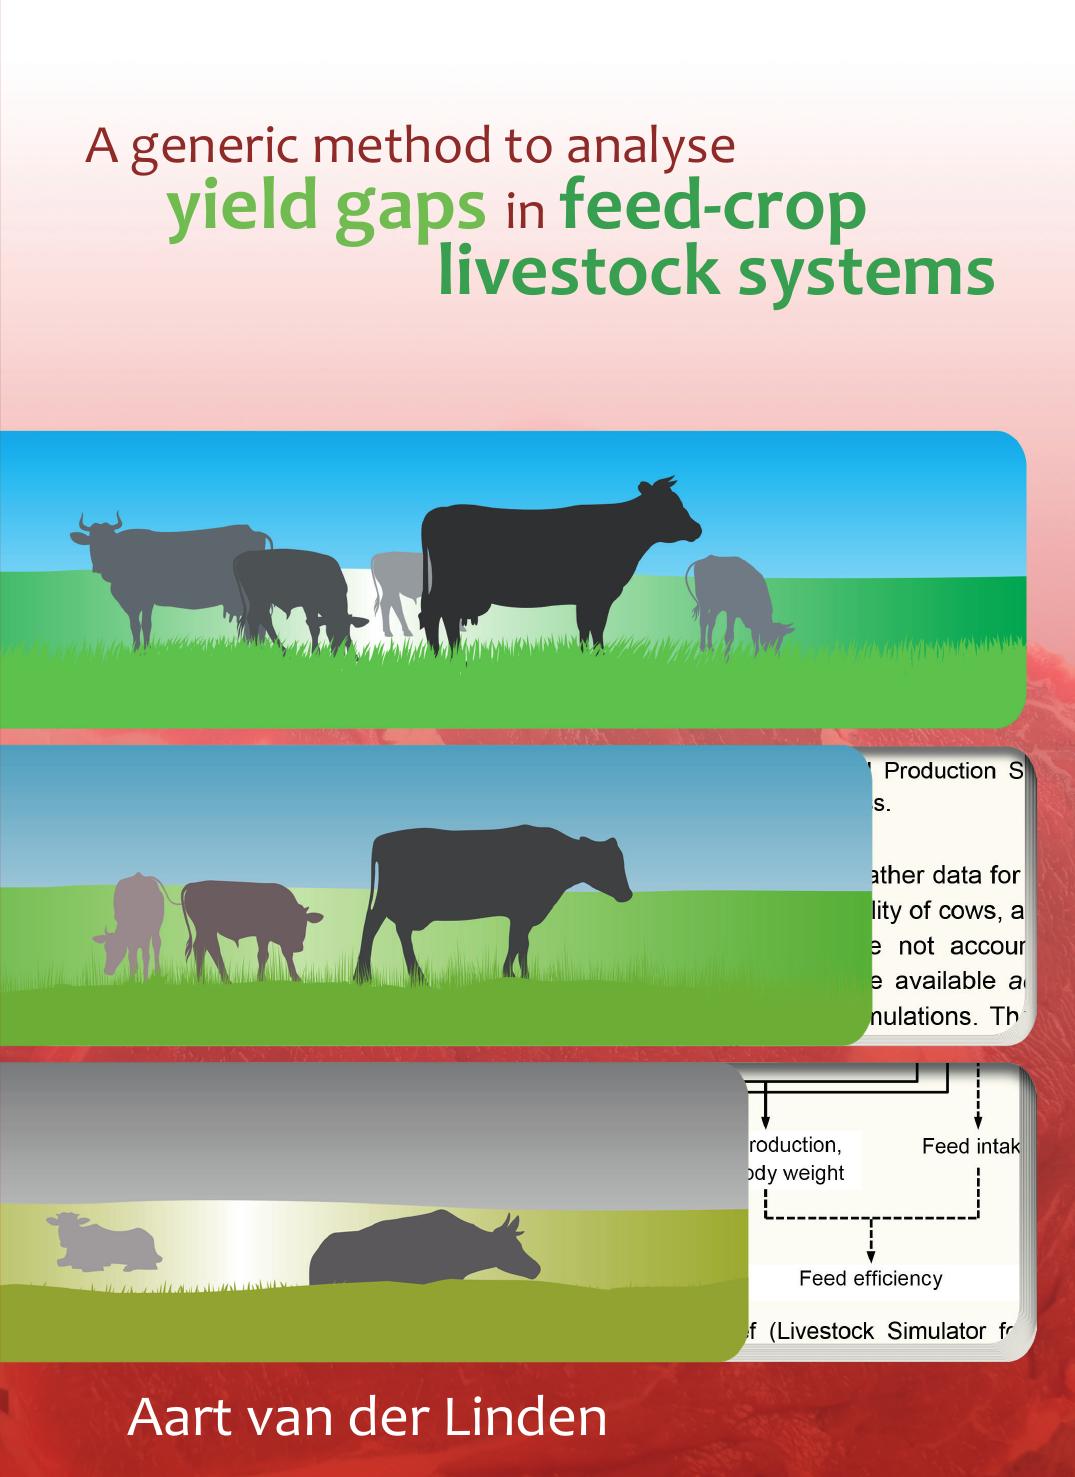 livestock systems yield gaps in feed-crop 2017